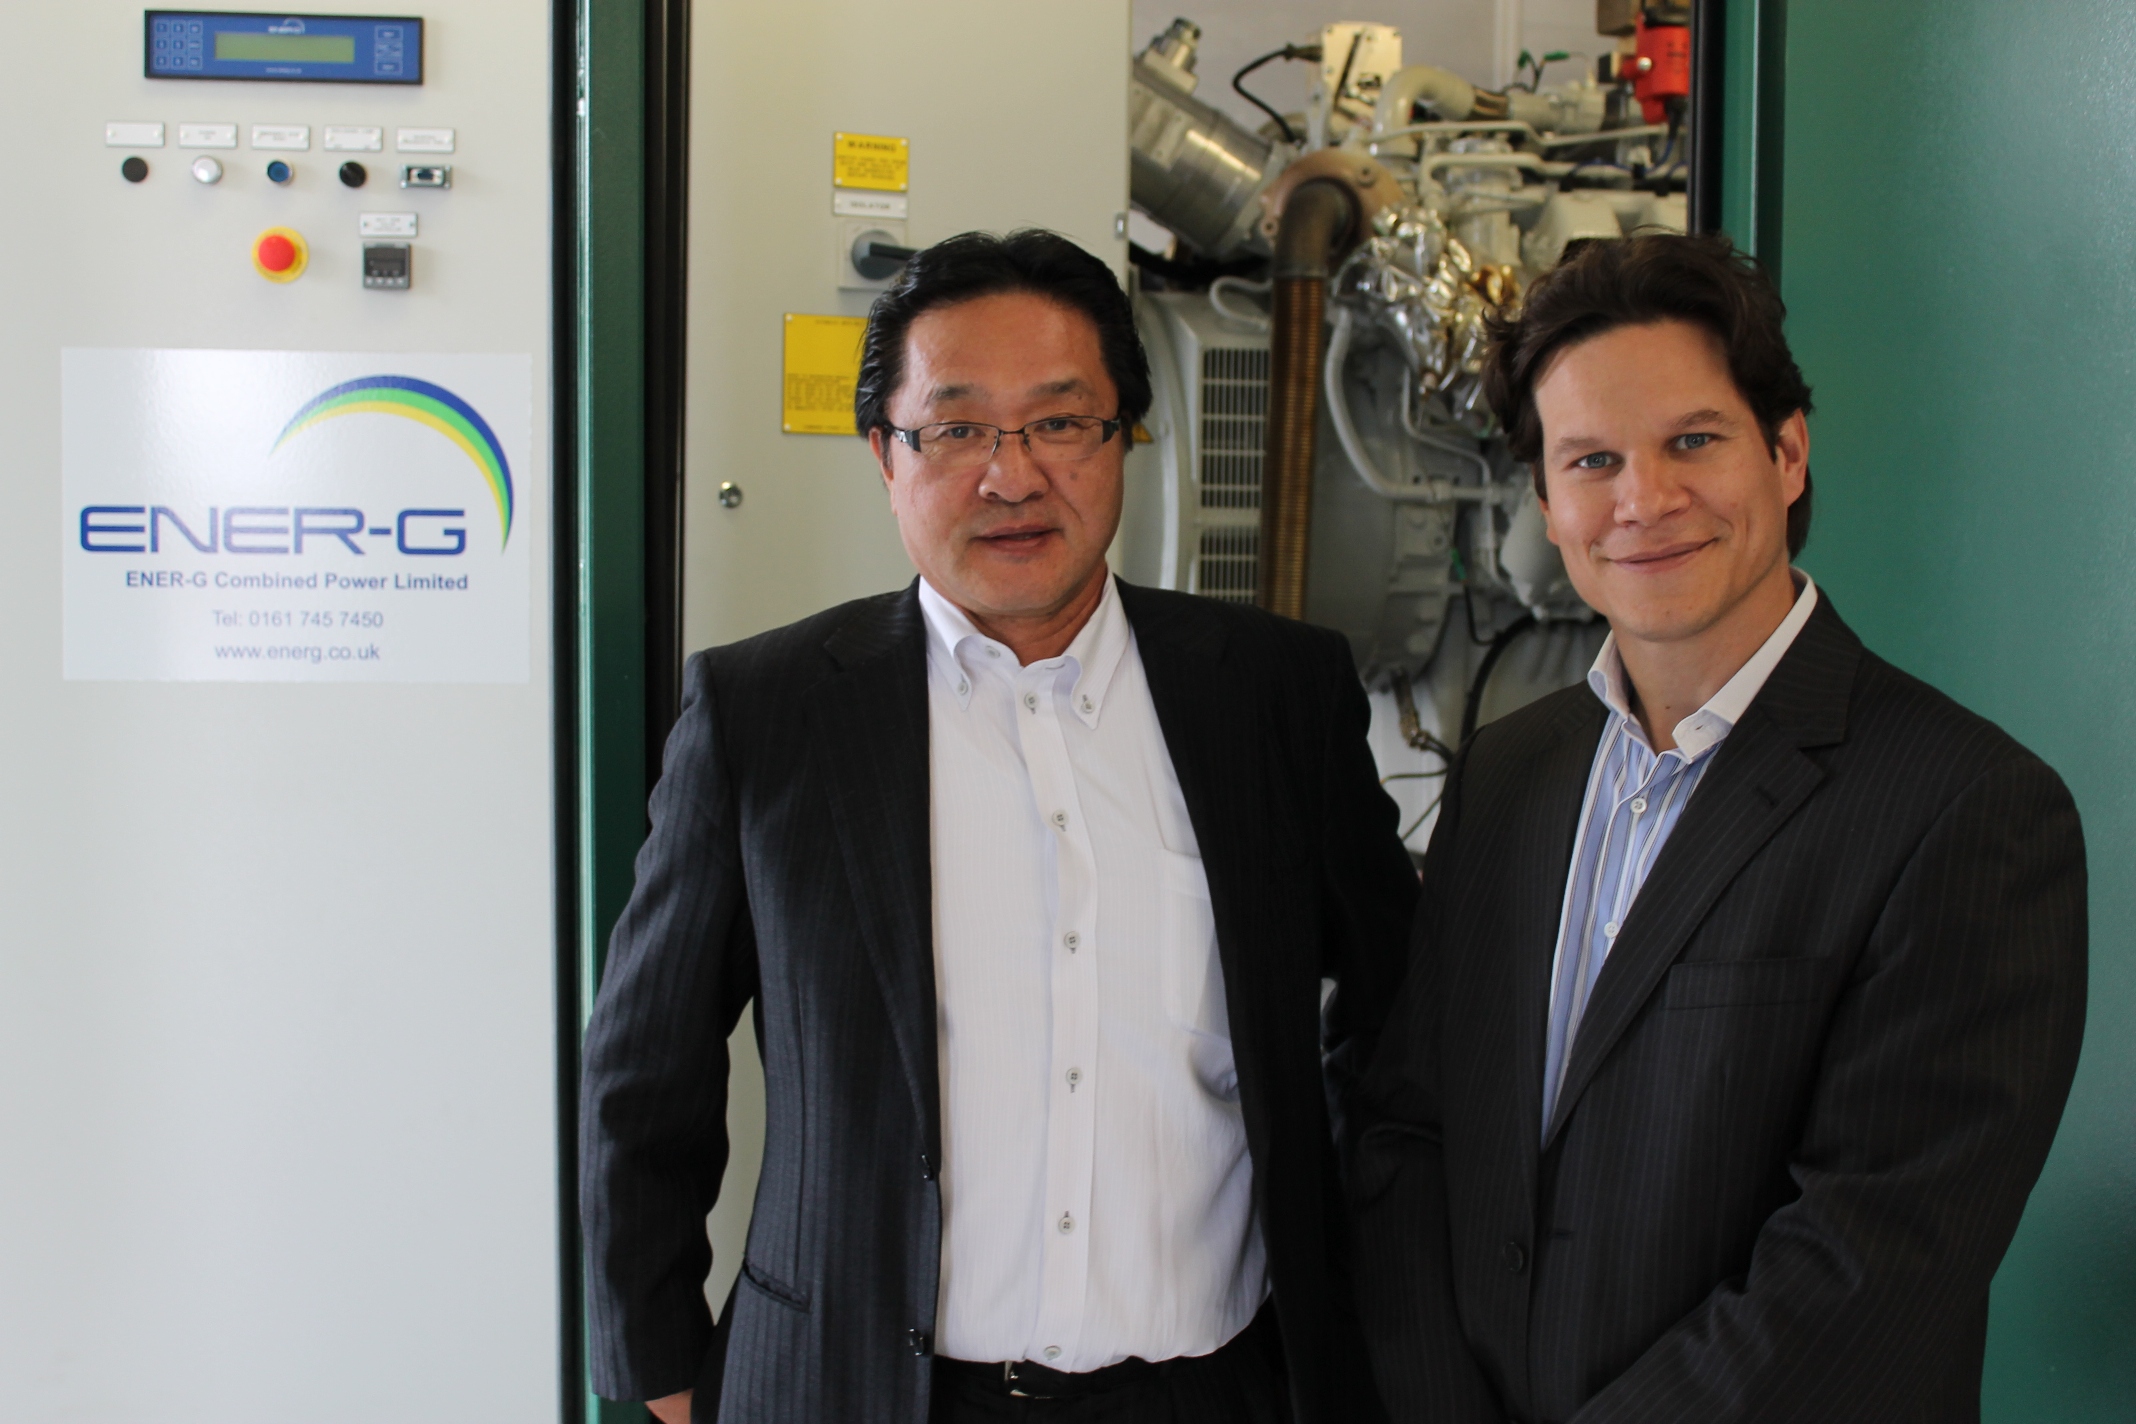 Toru Koyama, Chief Executive of Cornes Biogas  is pictured on left  with Matthieu Chassagne, Head of International Business Development for ENER-G Combined Power